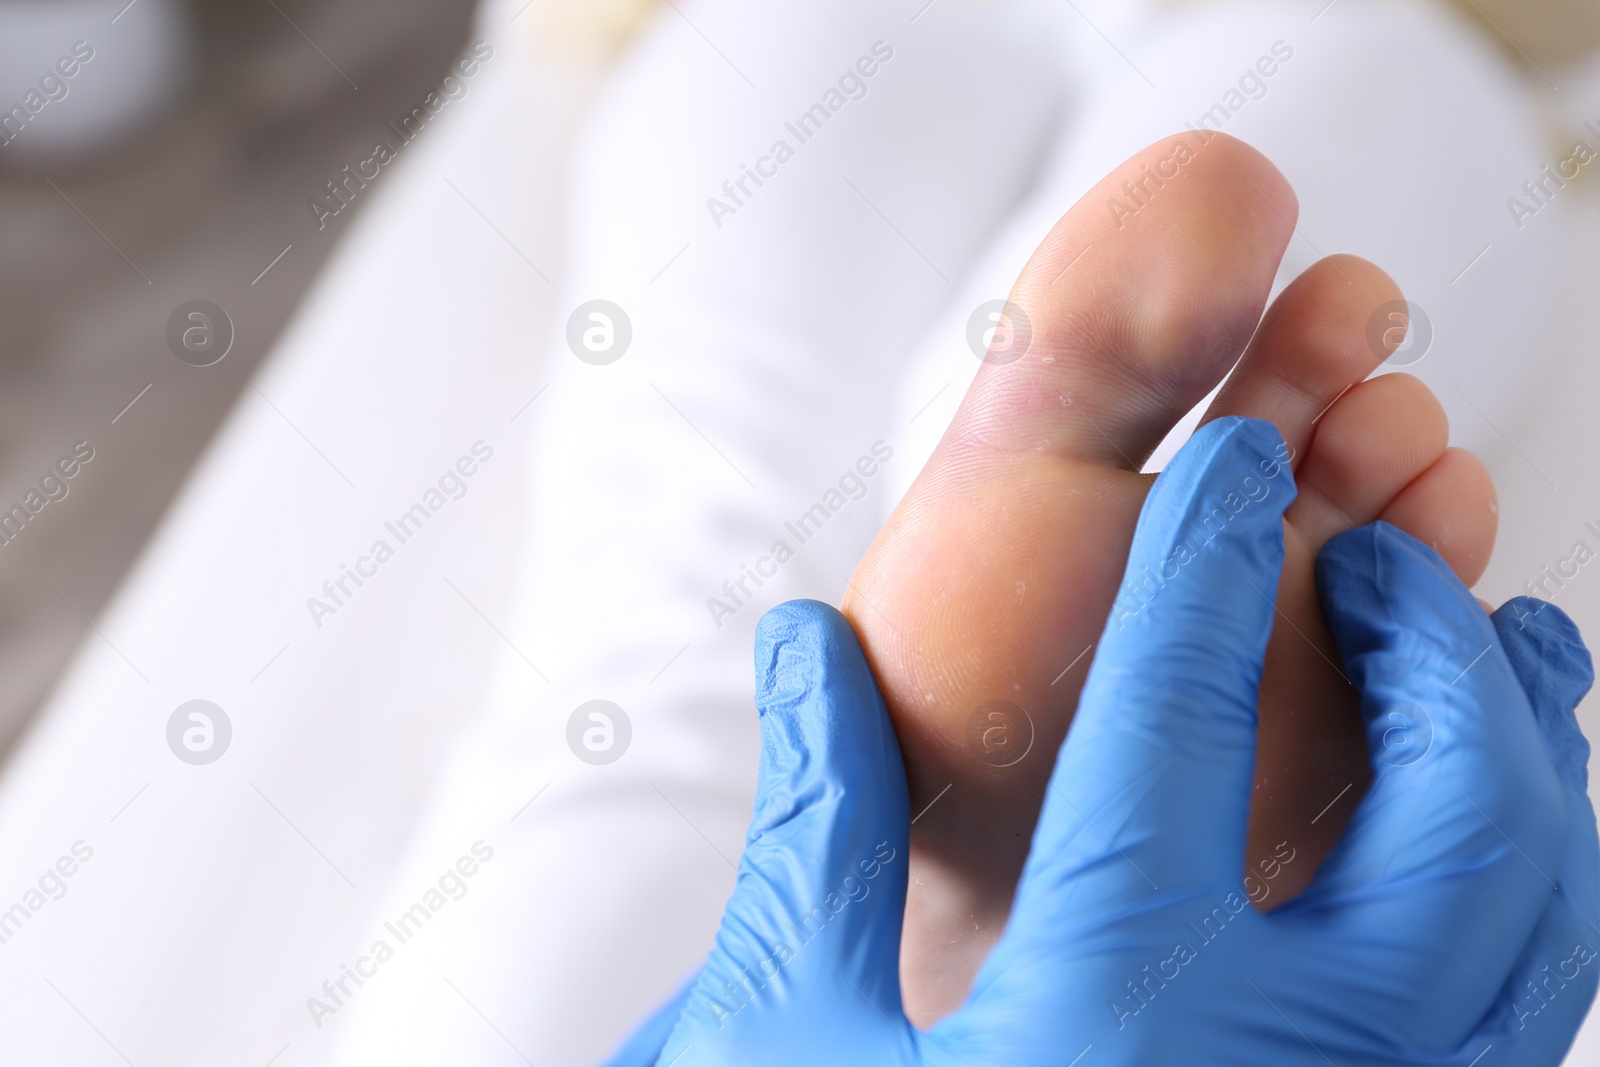 Photo of Doctor checking woman's foot with bruise at hospital, closeup